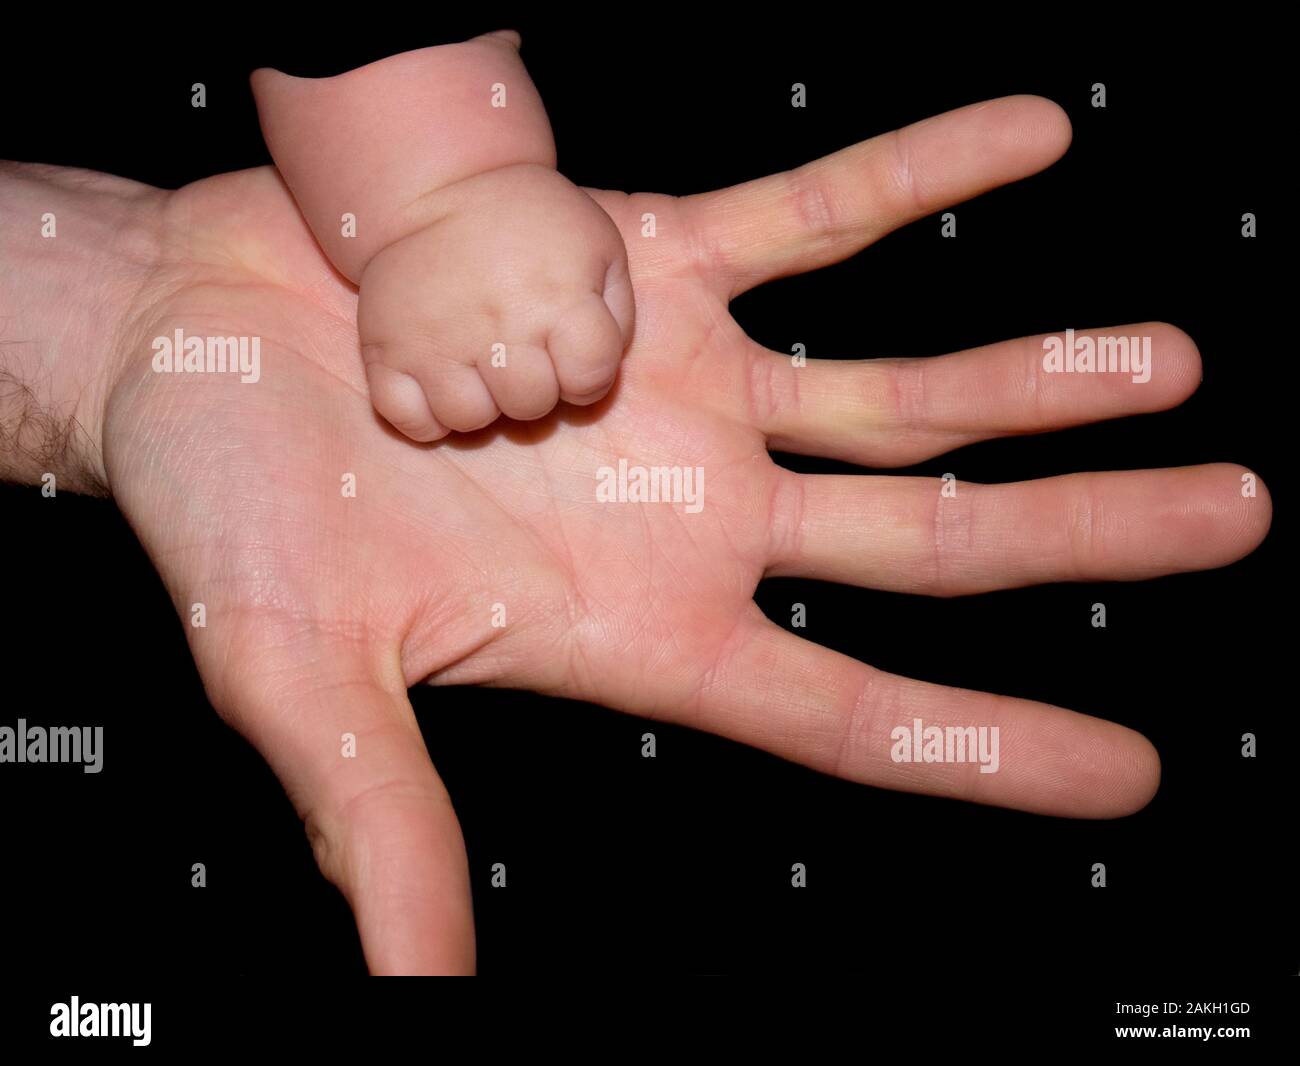 Baby's hand on adult's hand Stock Photo